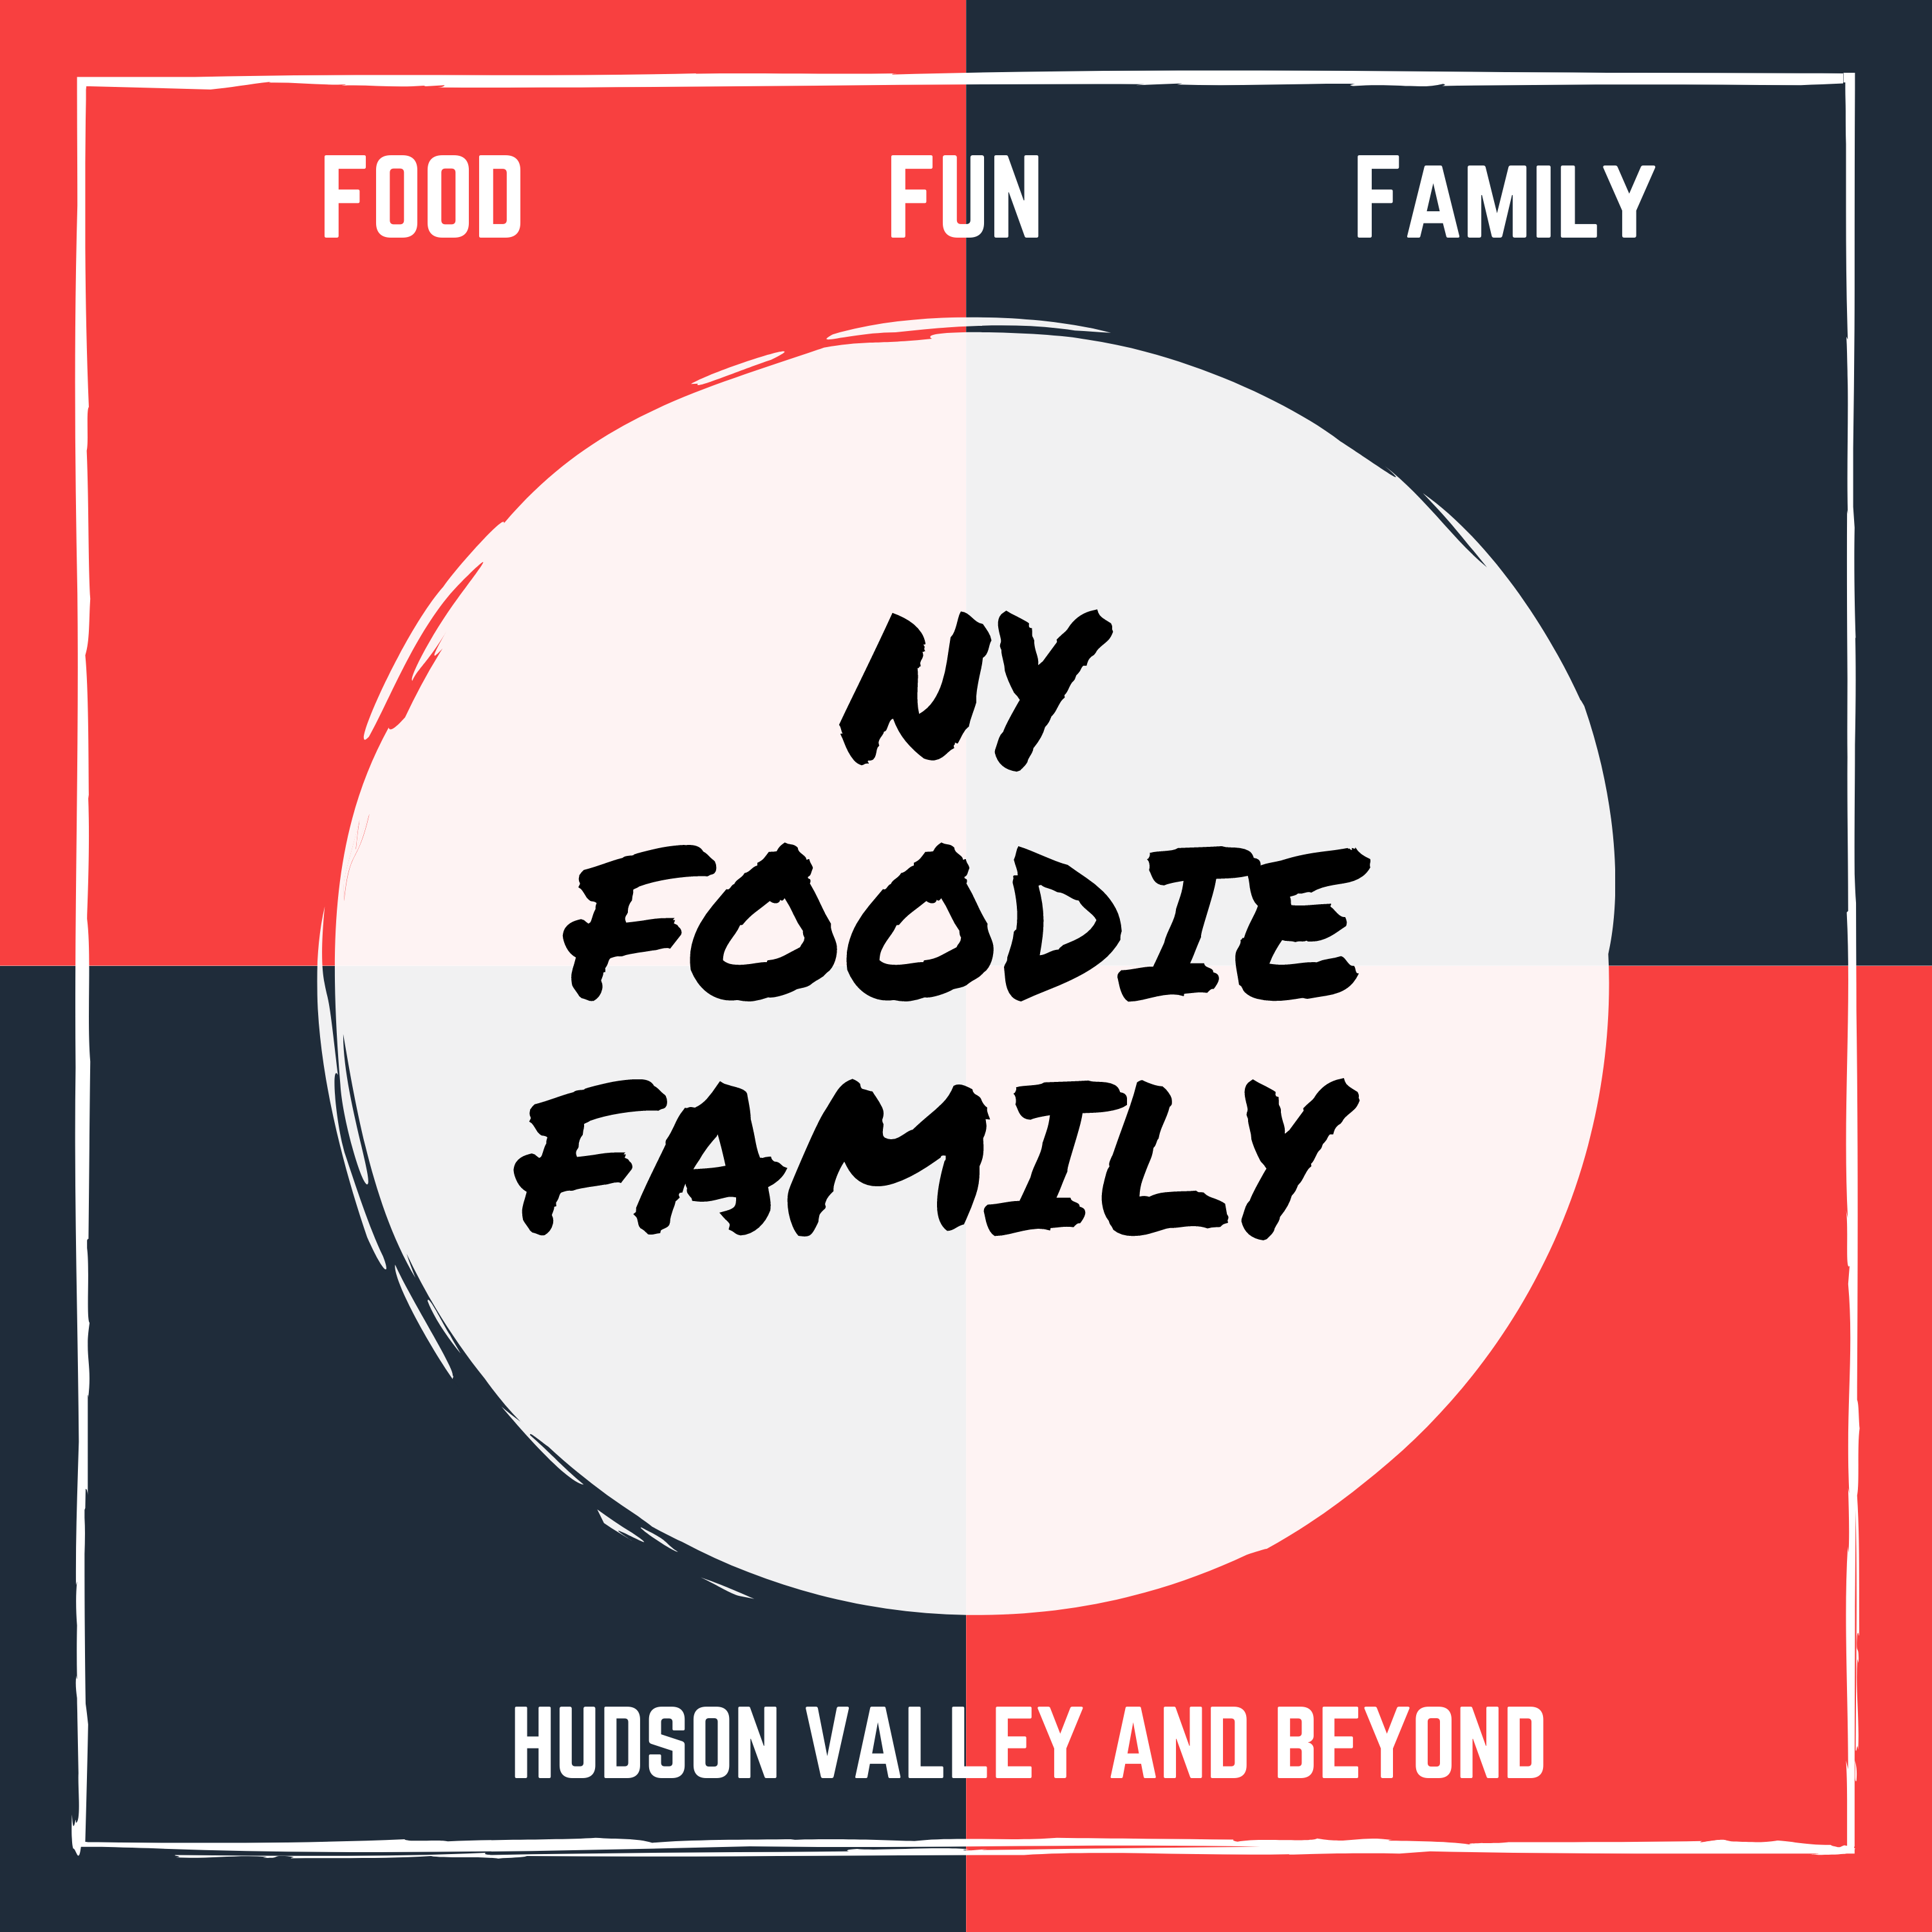 family fun Archives - NY Foodie Family